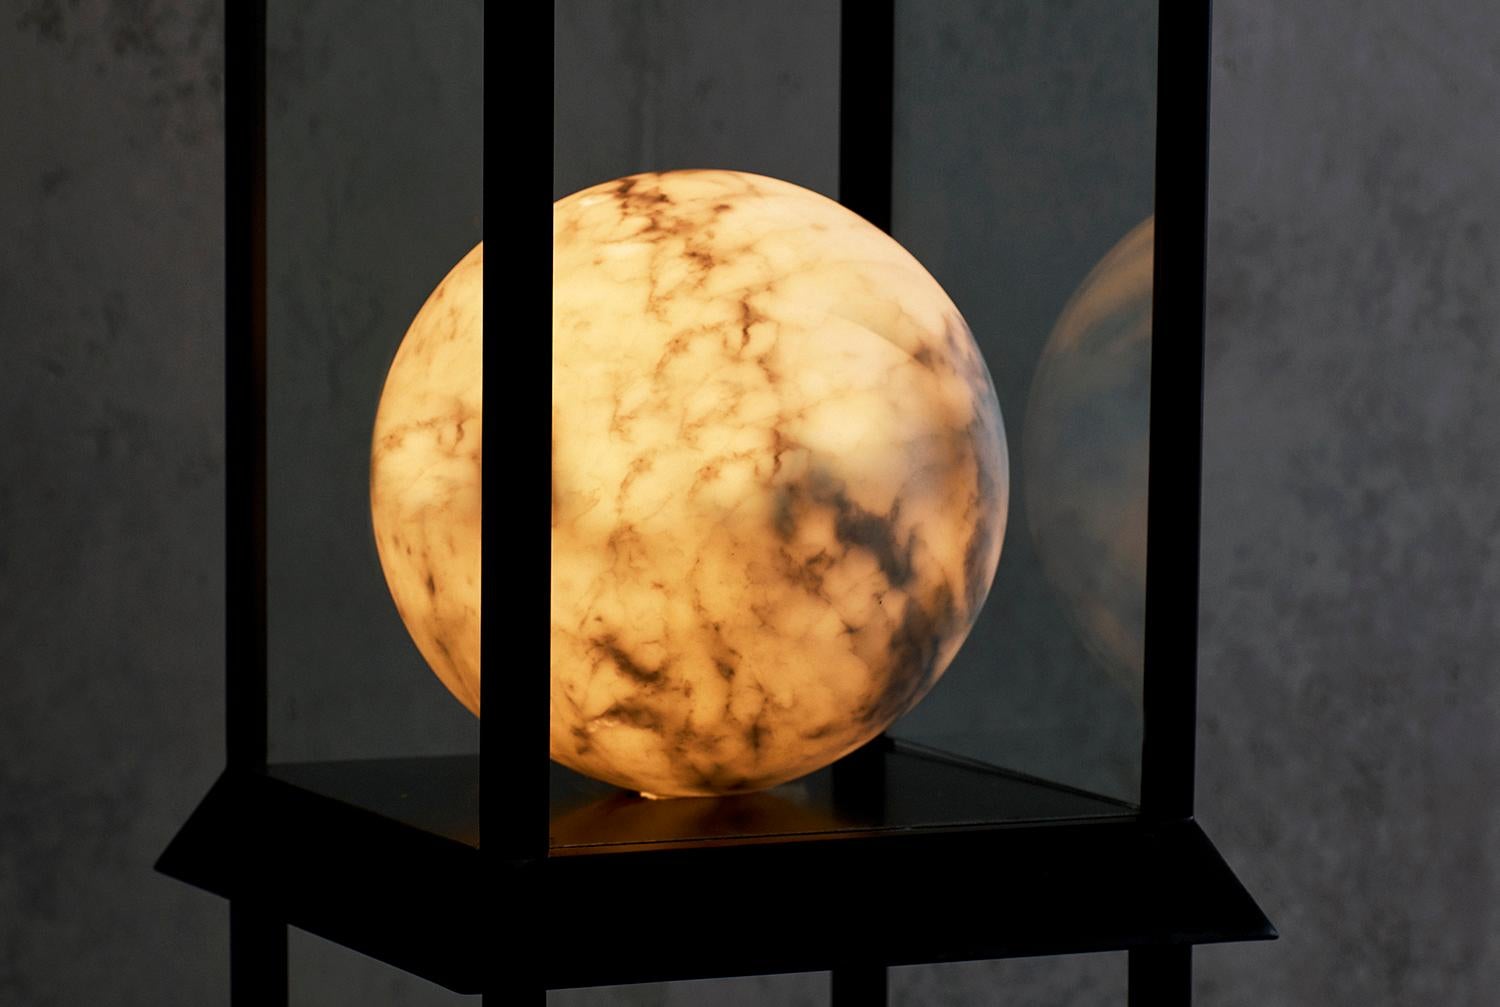 Each of these three glass vitrine cabinets contains a sphere made from a solid piece of marble which has been meticulously hollowed out from an opening only 1.5? in diameter. This extremely delicate, exacting process takes months to perform and